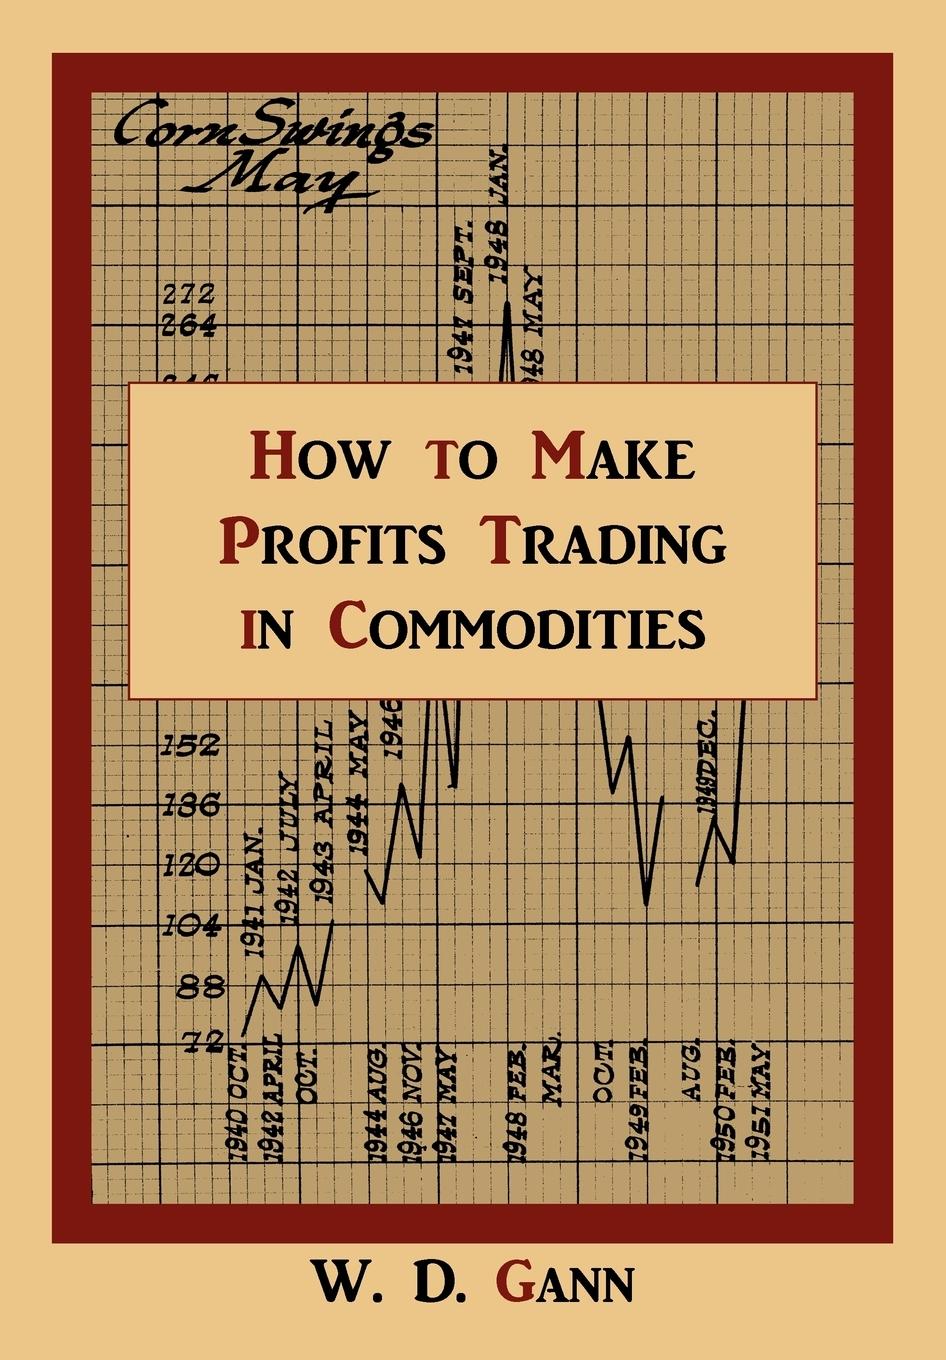 How to Make Profits Trading in Commodities - Gann, W. D.